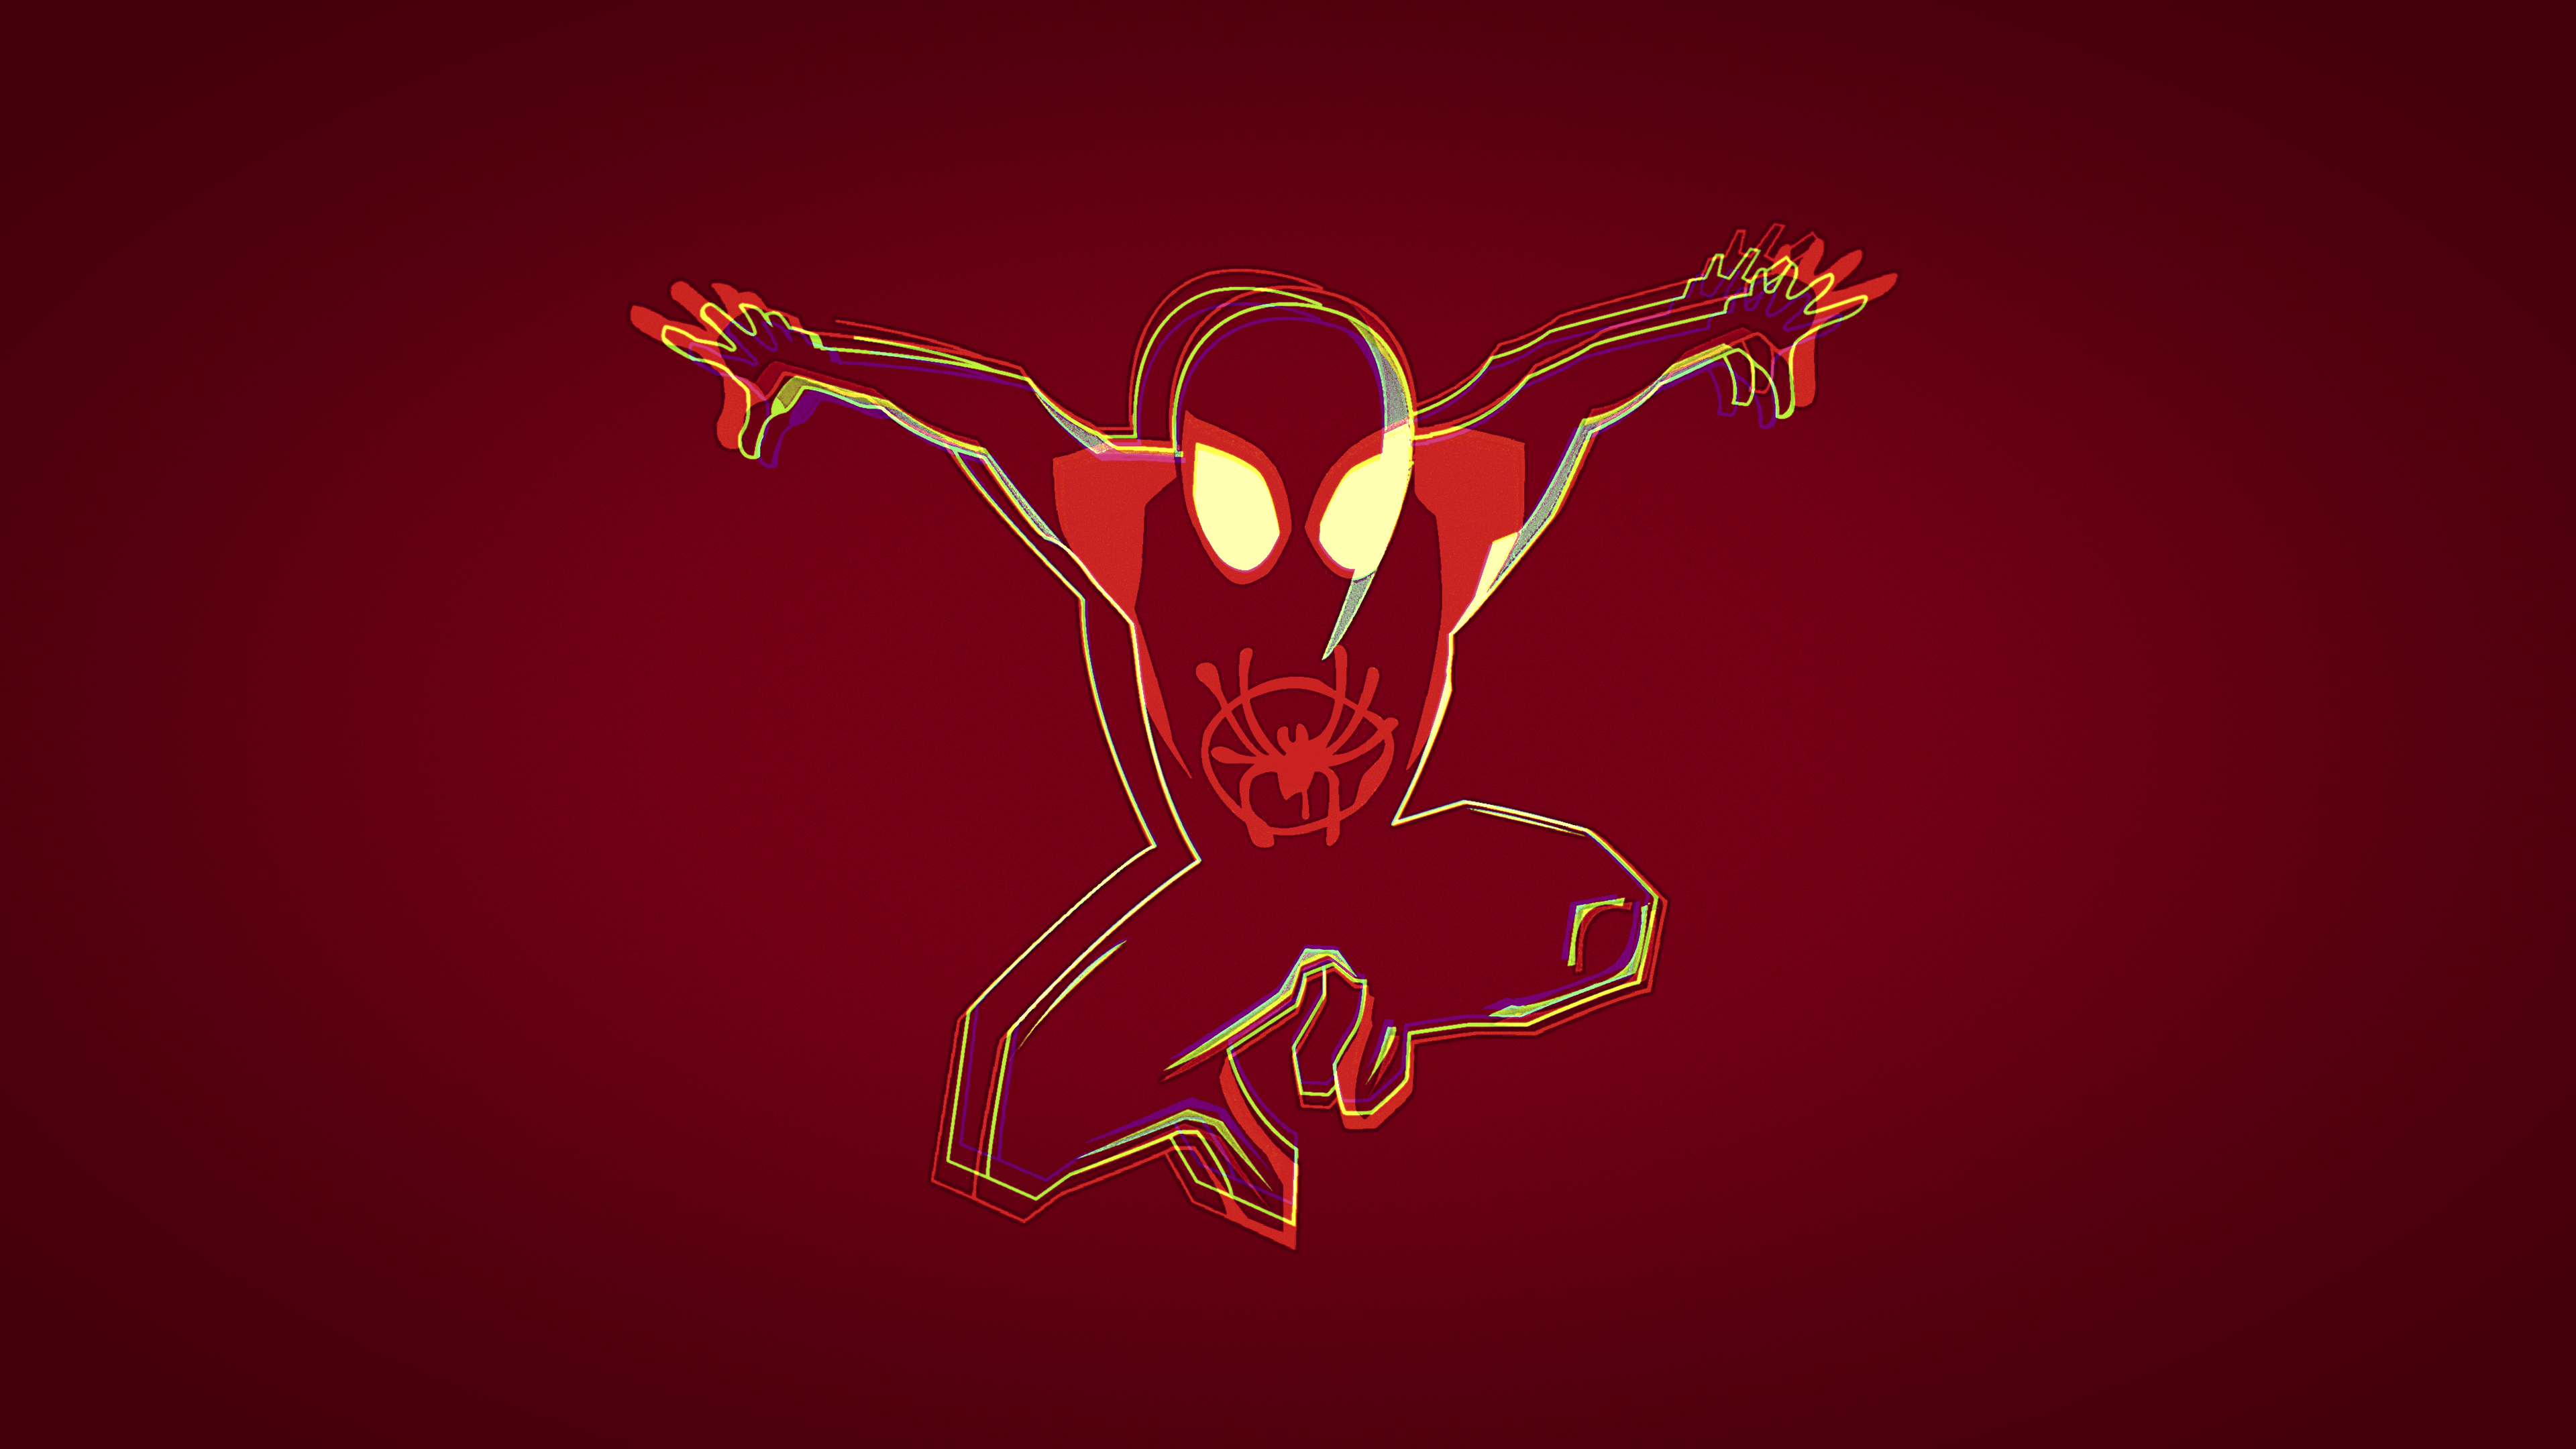 Spider Man Into The Spiderverse Digital Art Red Artwork Red Background 3840x2160